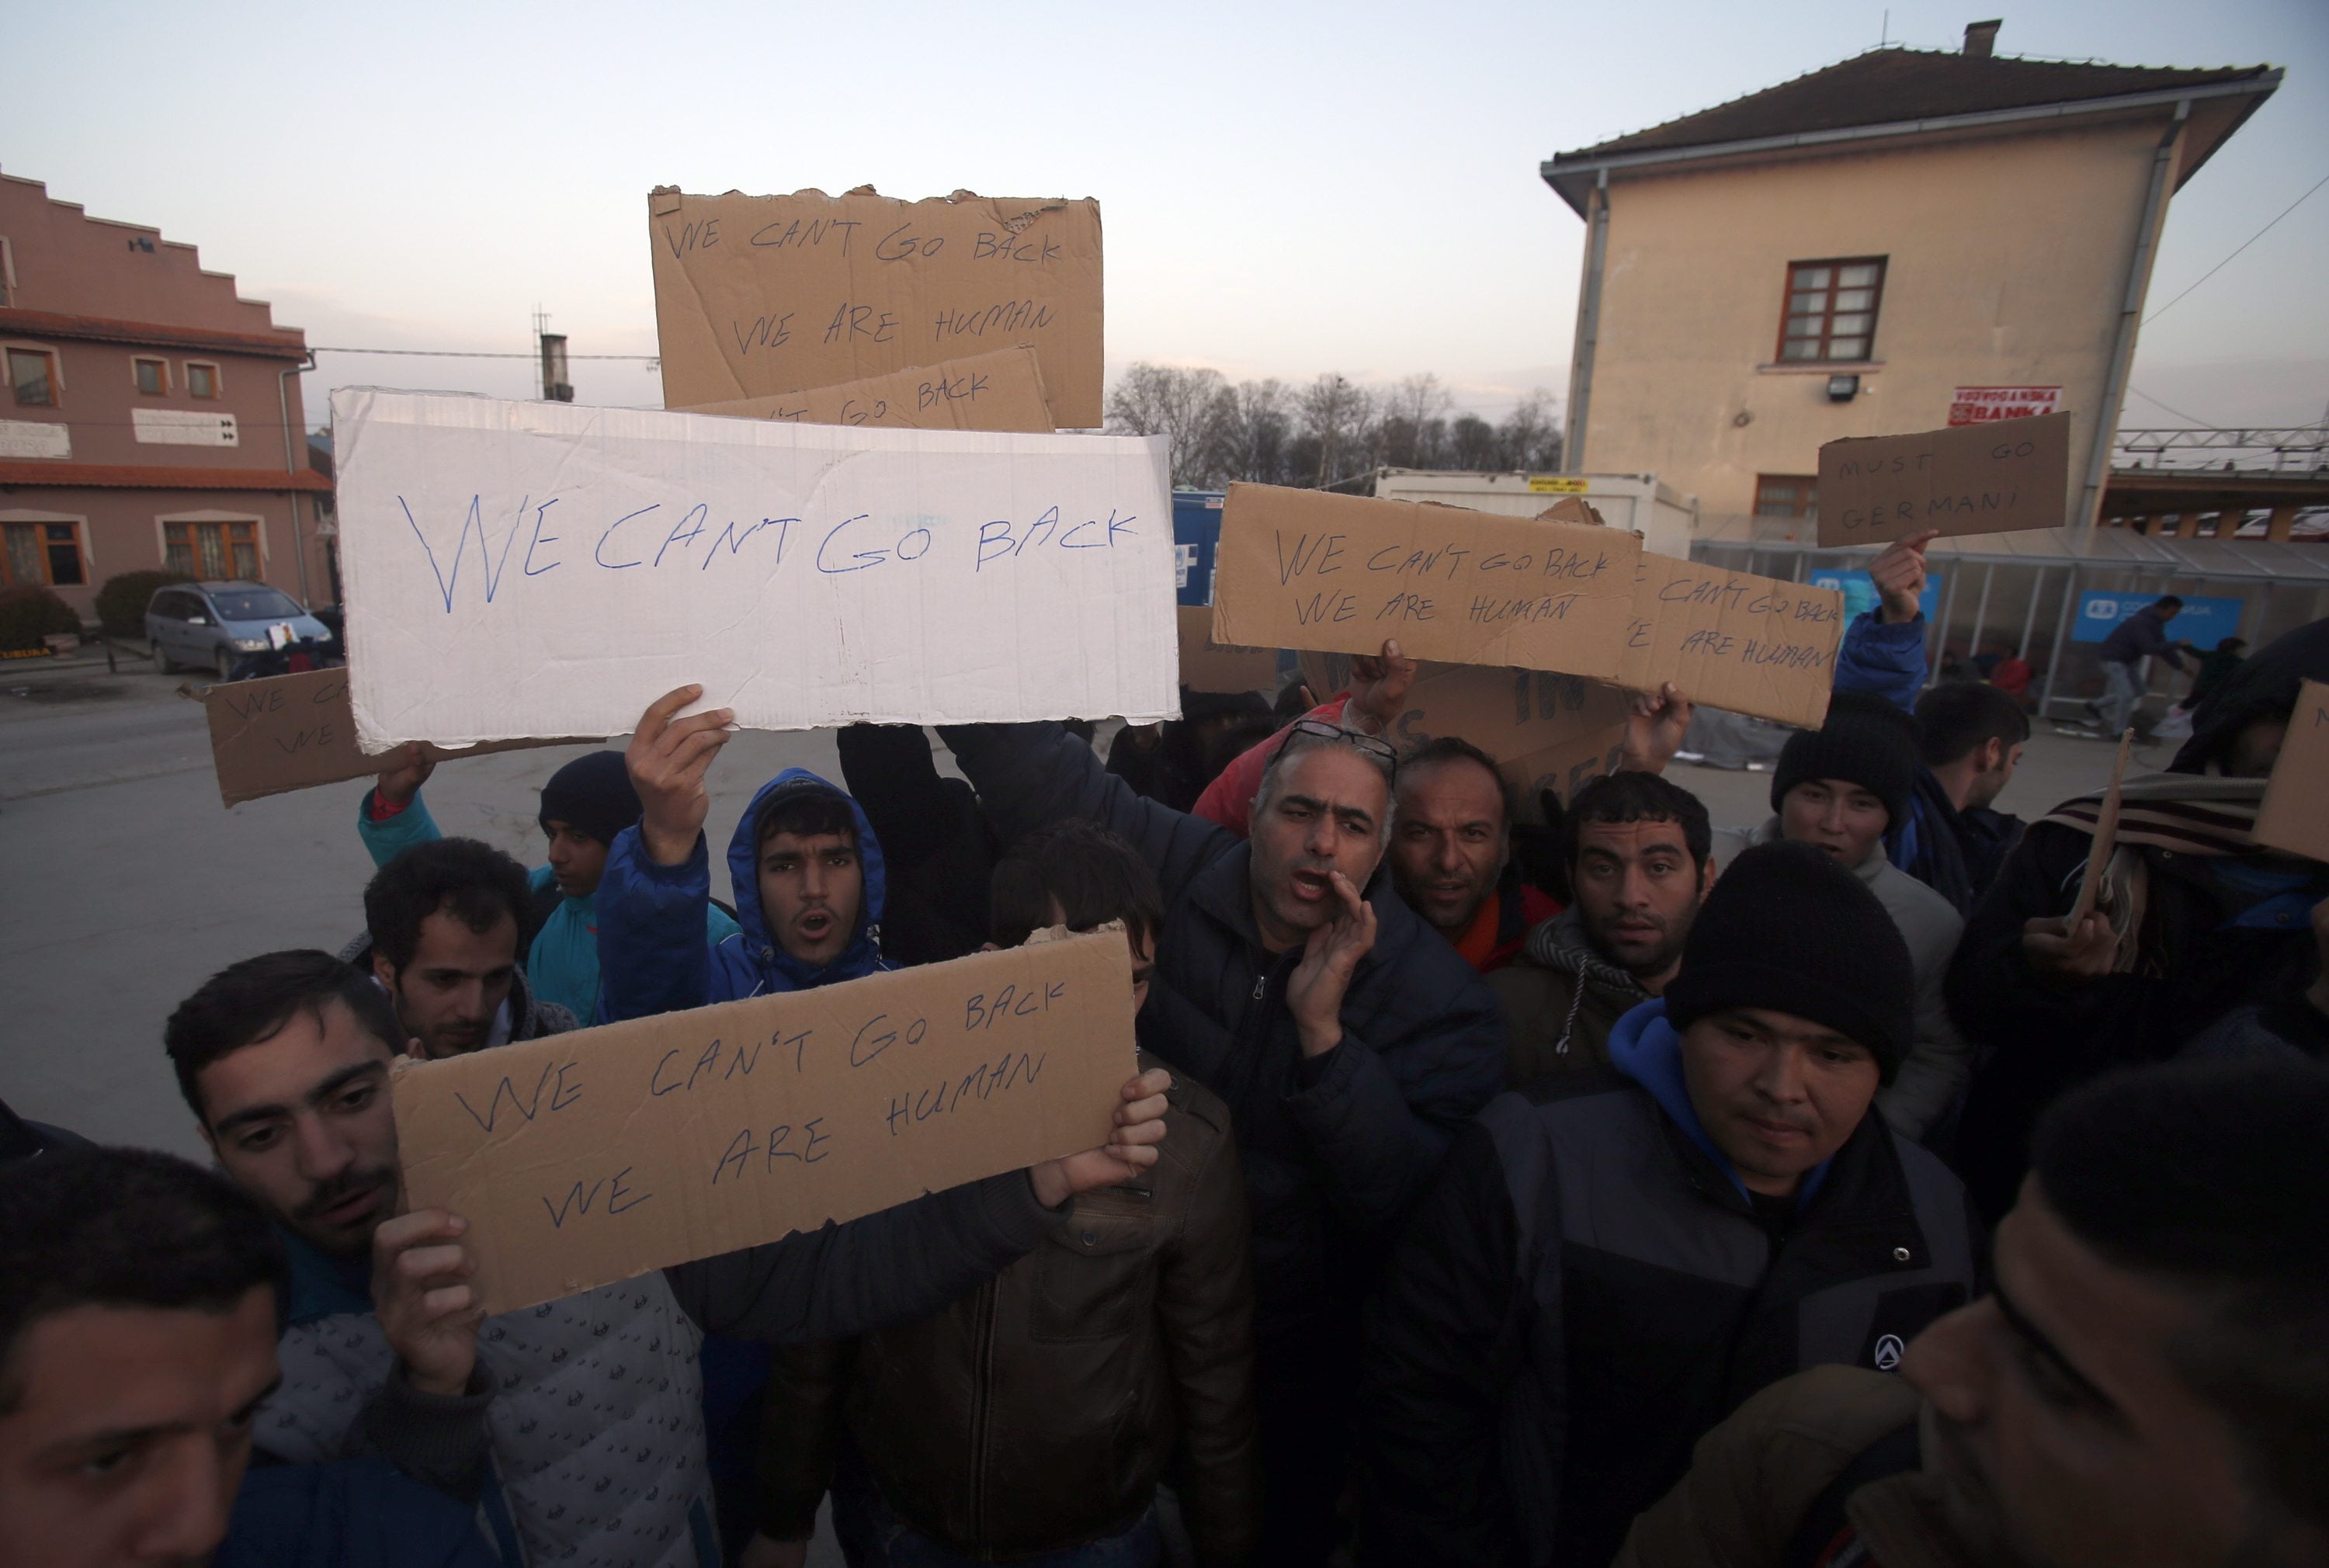 Migrants shout slogans and protest Wednesday at the train station in Sid, west of Belgrade, Serbia. More than 200 people have been camping at a border train station after they were sent back to Serbia from Croatia amid tightened rules for migrants.